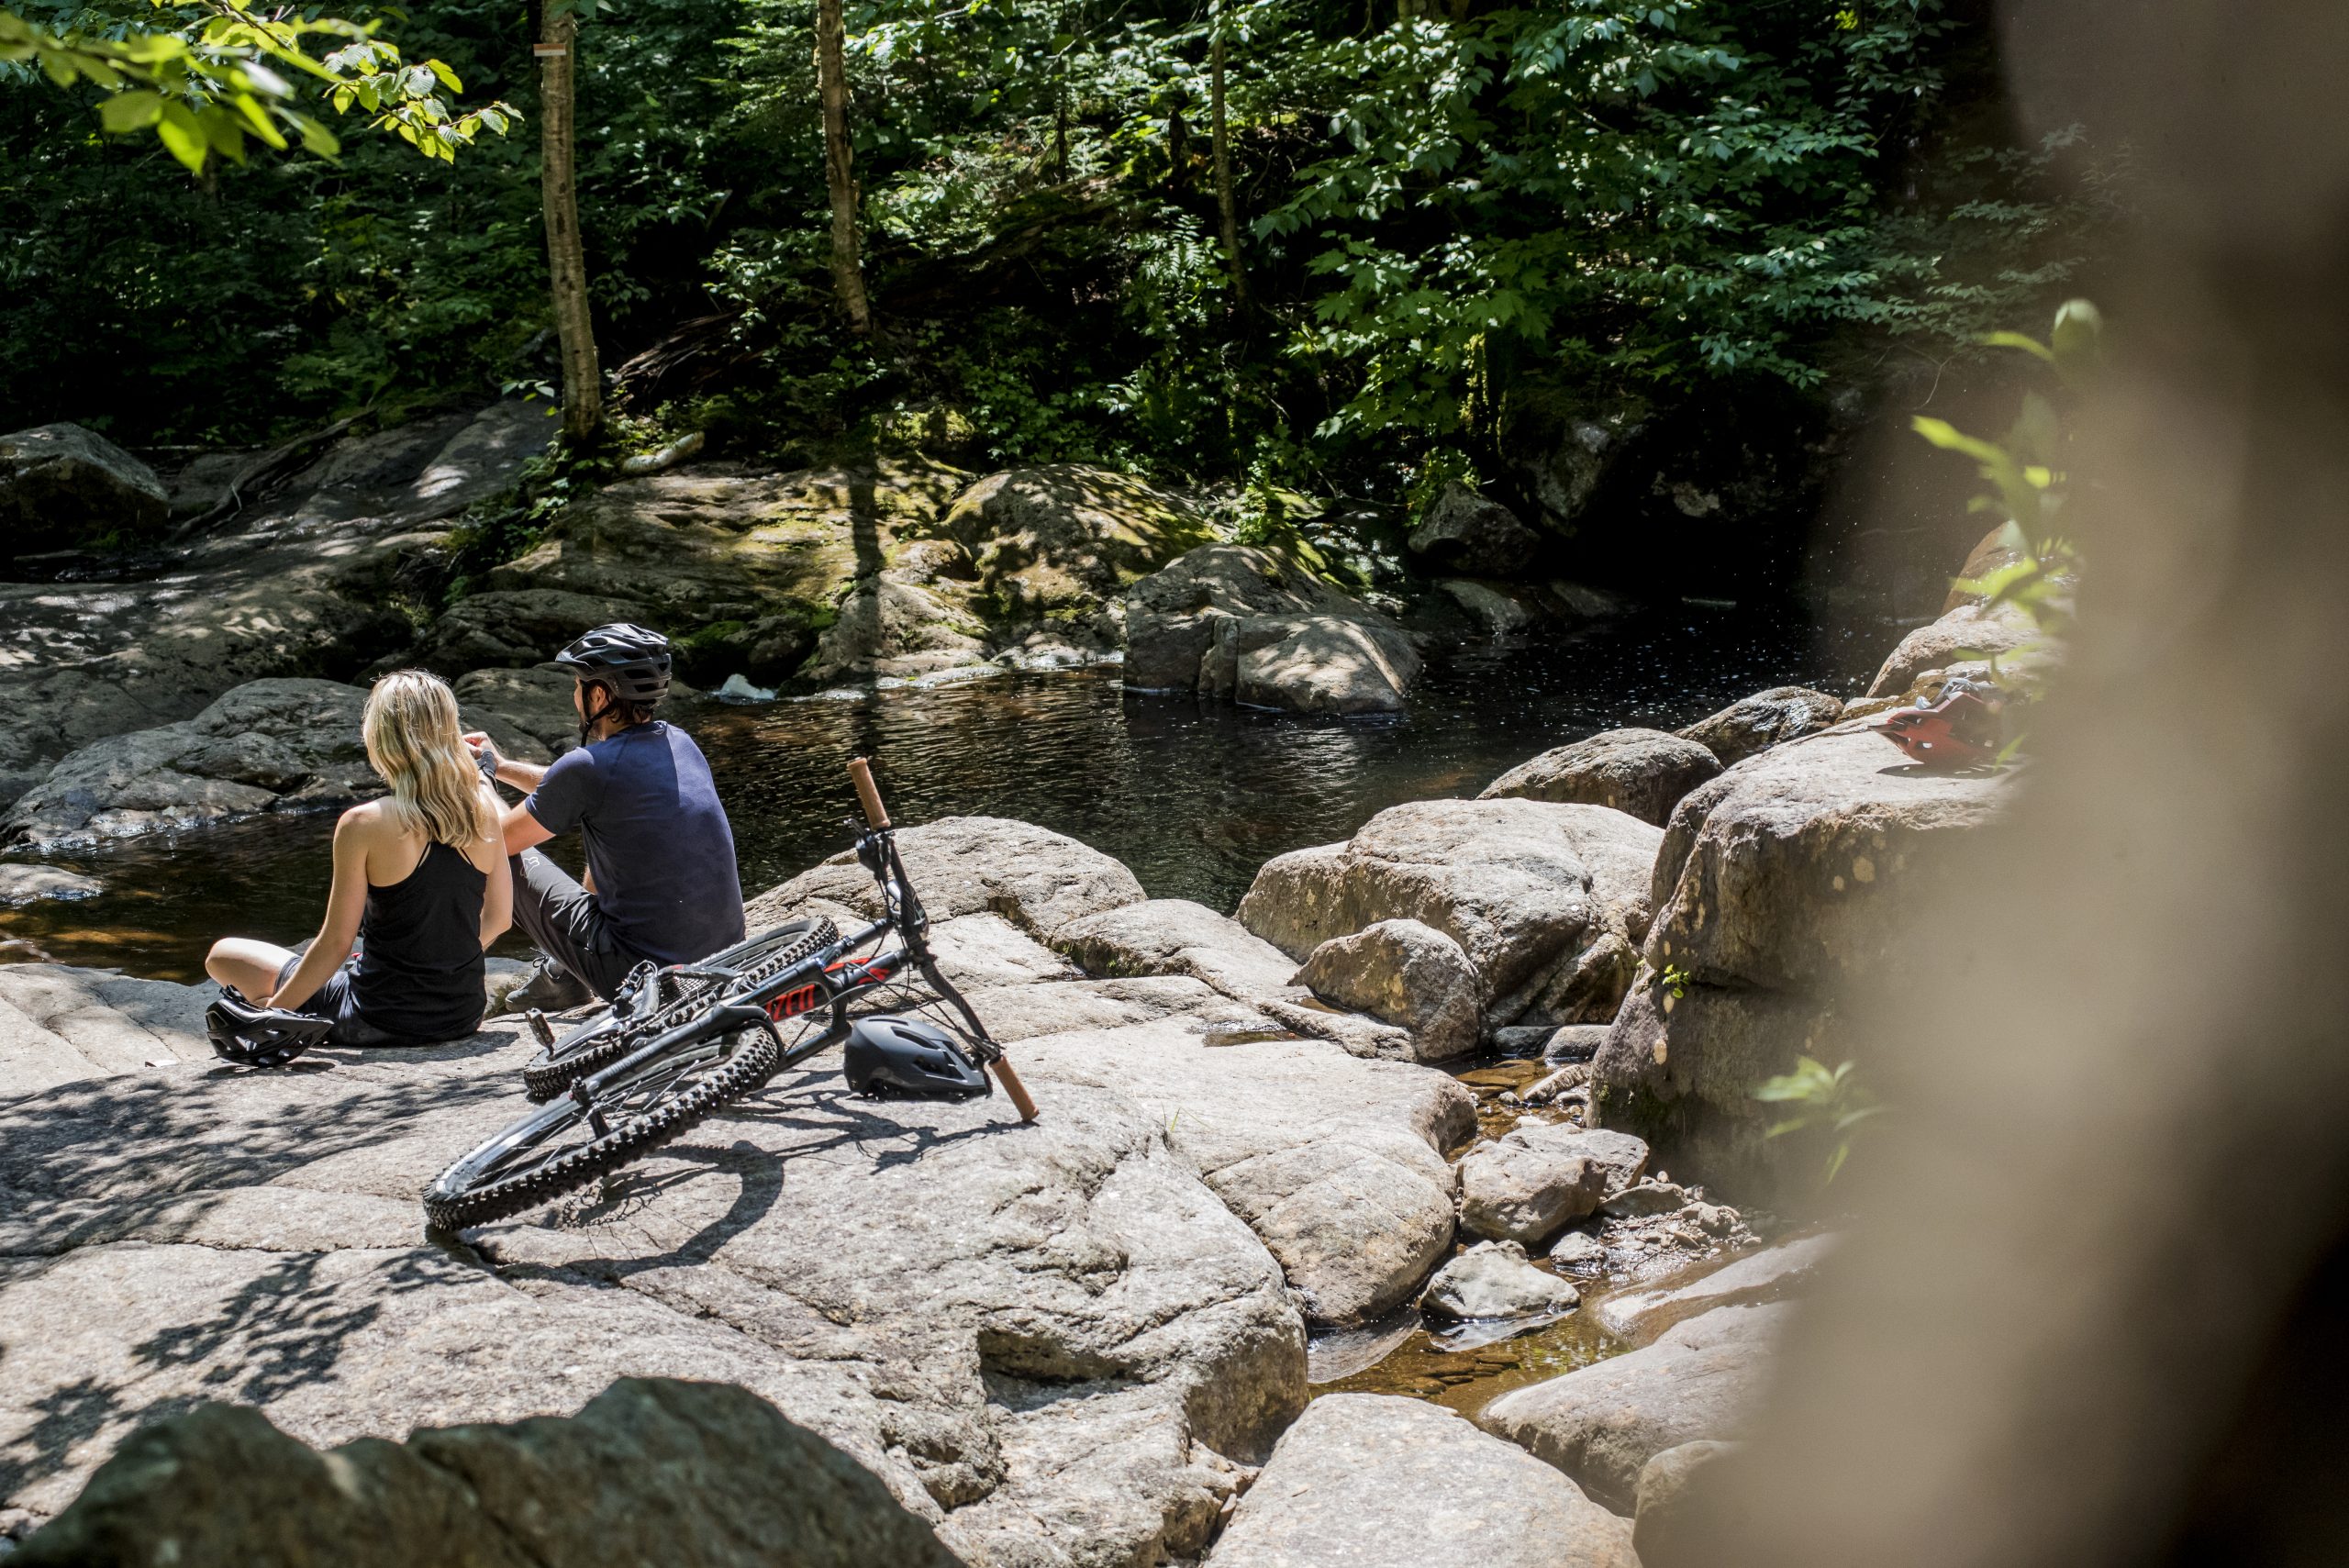 Two cyclists taking a break with their mountain bikes in front of a stream, surrounded by nature, during their outdoor activity.